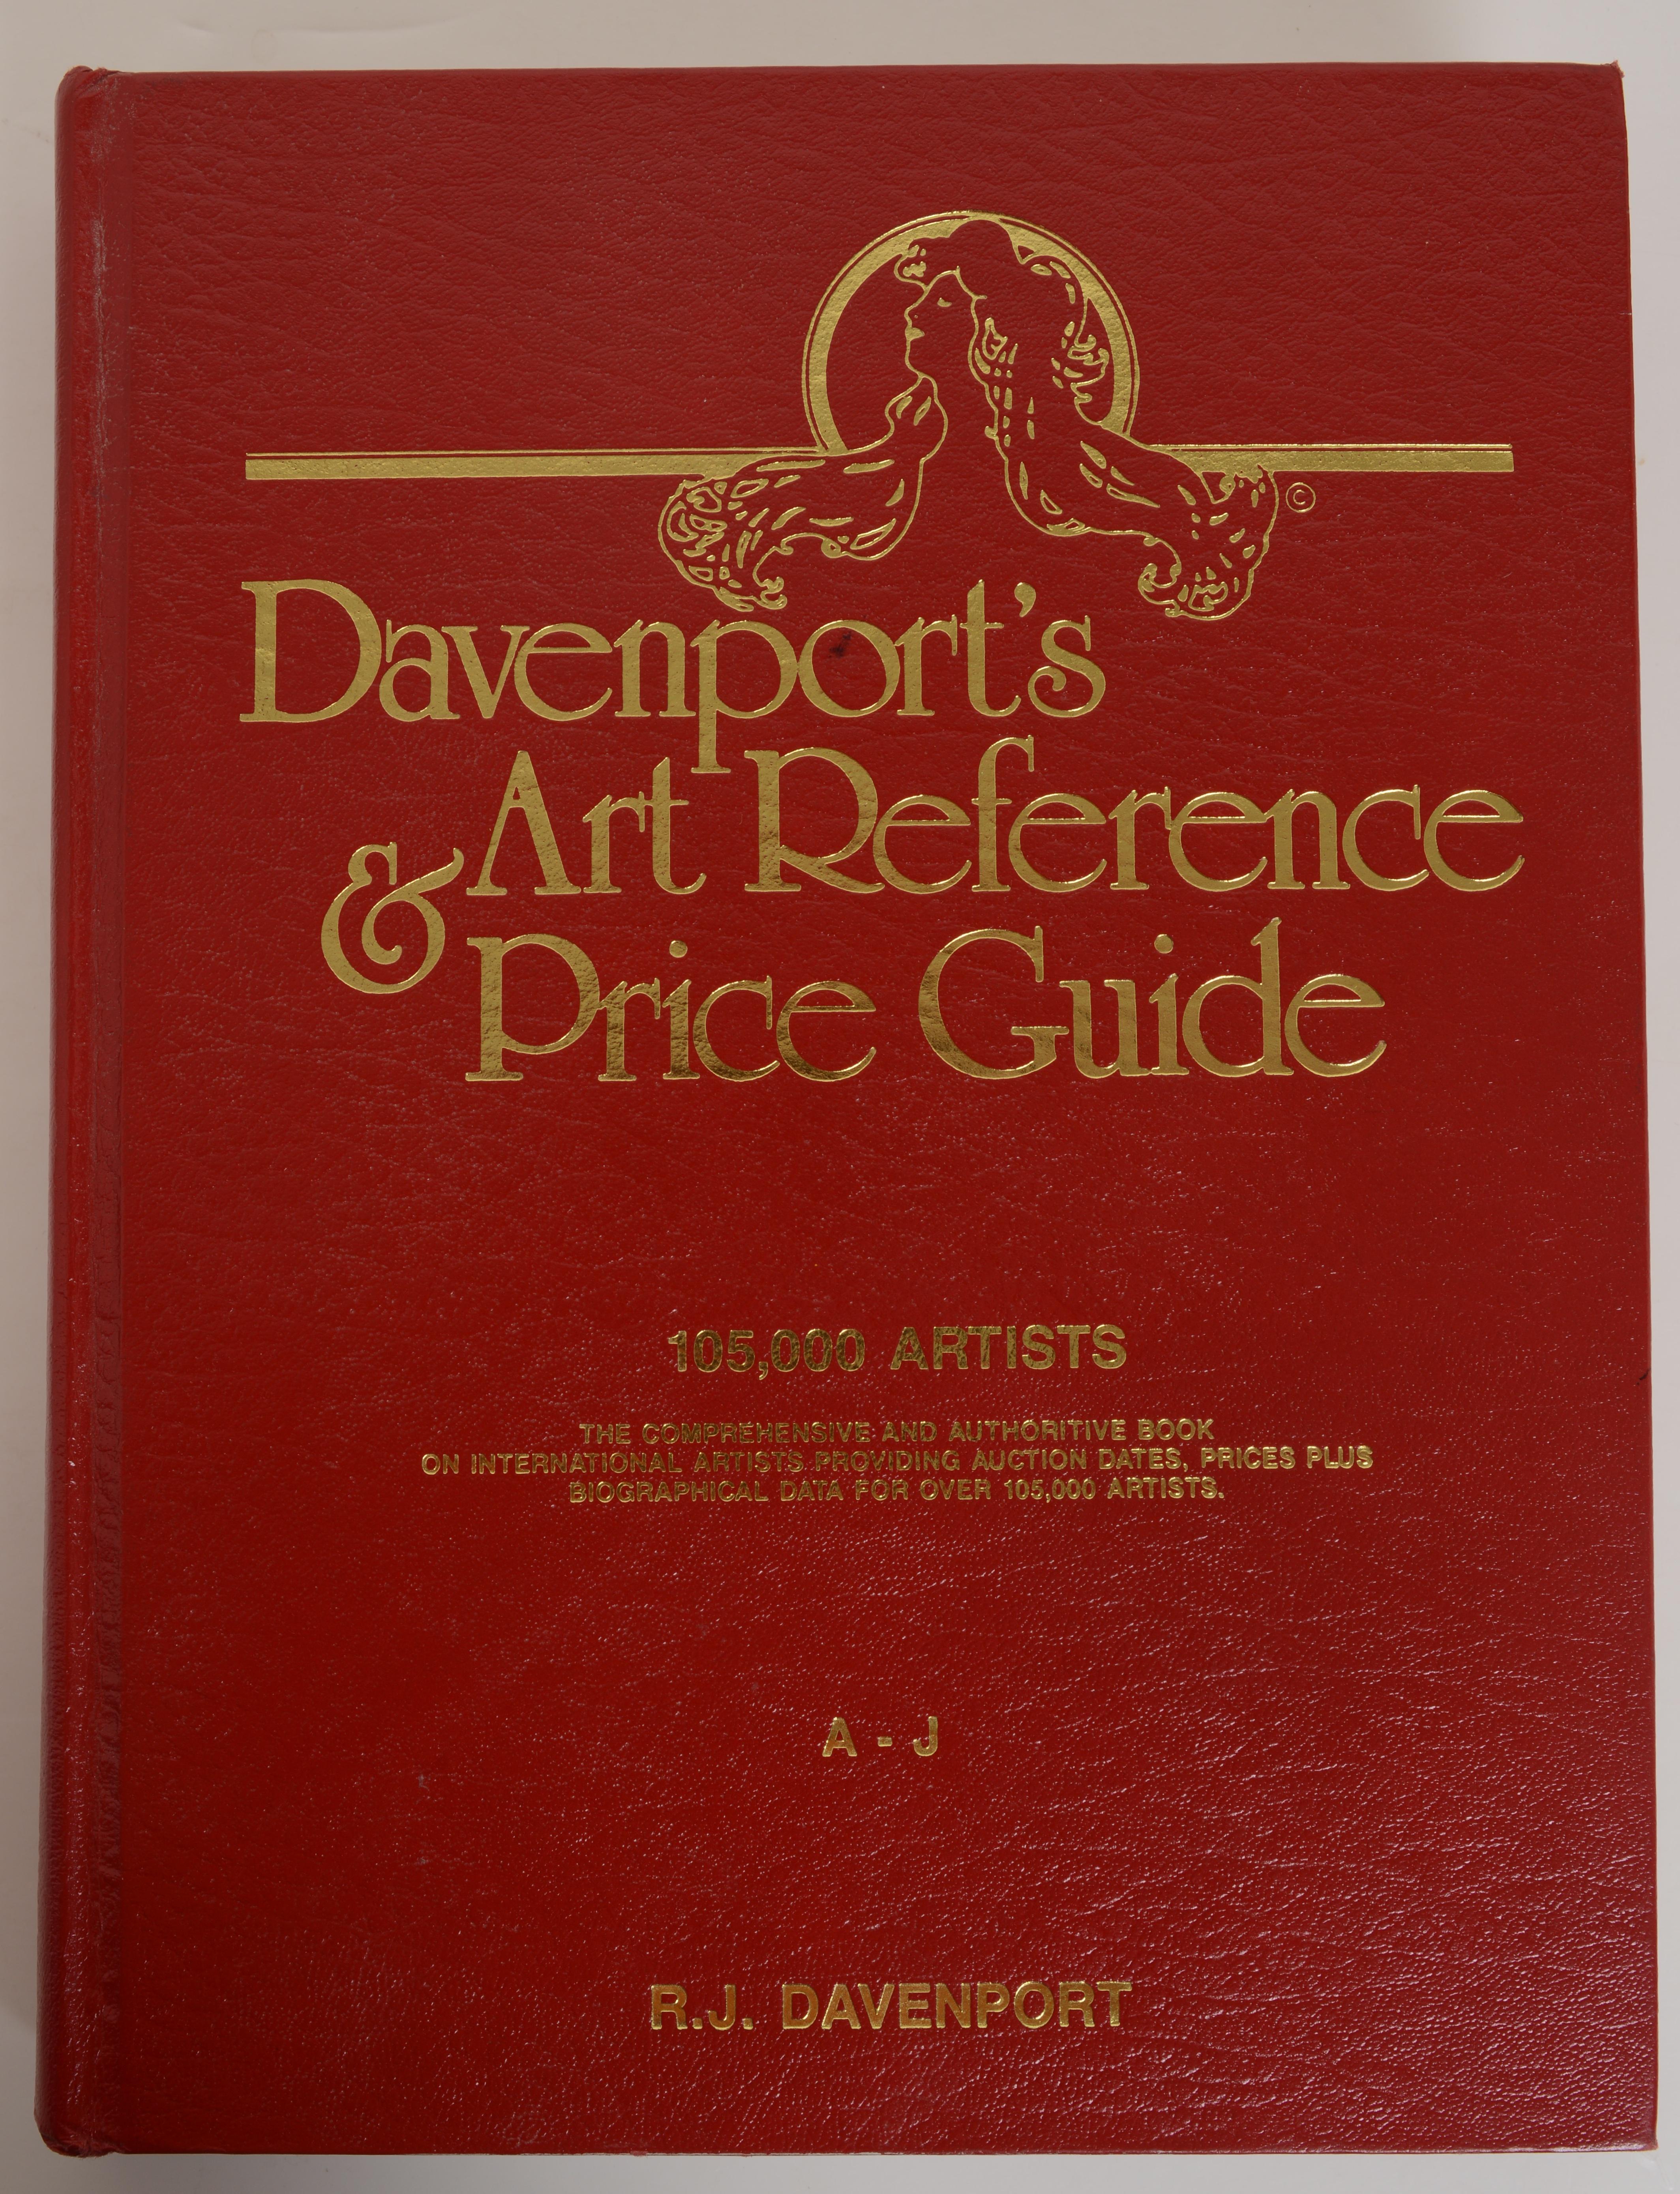 Davenport's Art Reference & Price Guide 2 Volume Set by R. J. Davenport. 1st Ed hardcover. 1st Ed hardcover no dust jackets as issued. The comprehensive and authoritative book on international artists providing auction dates, prices, plus